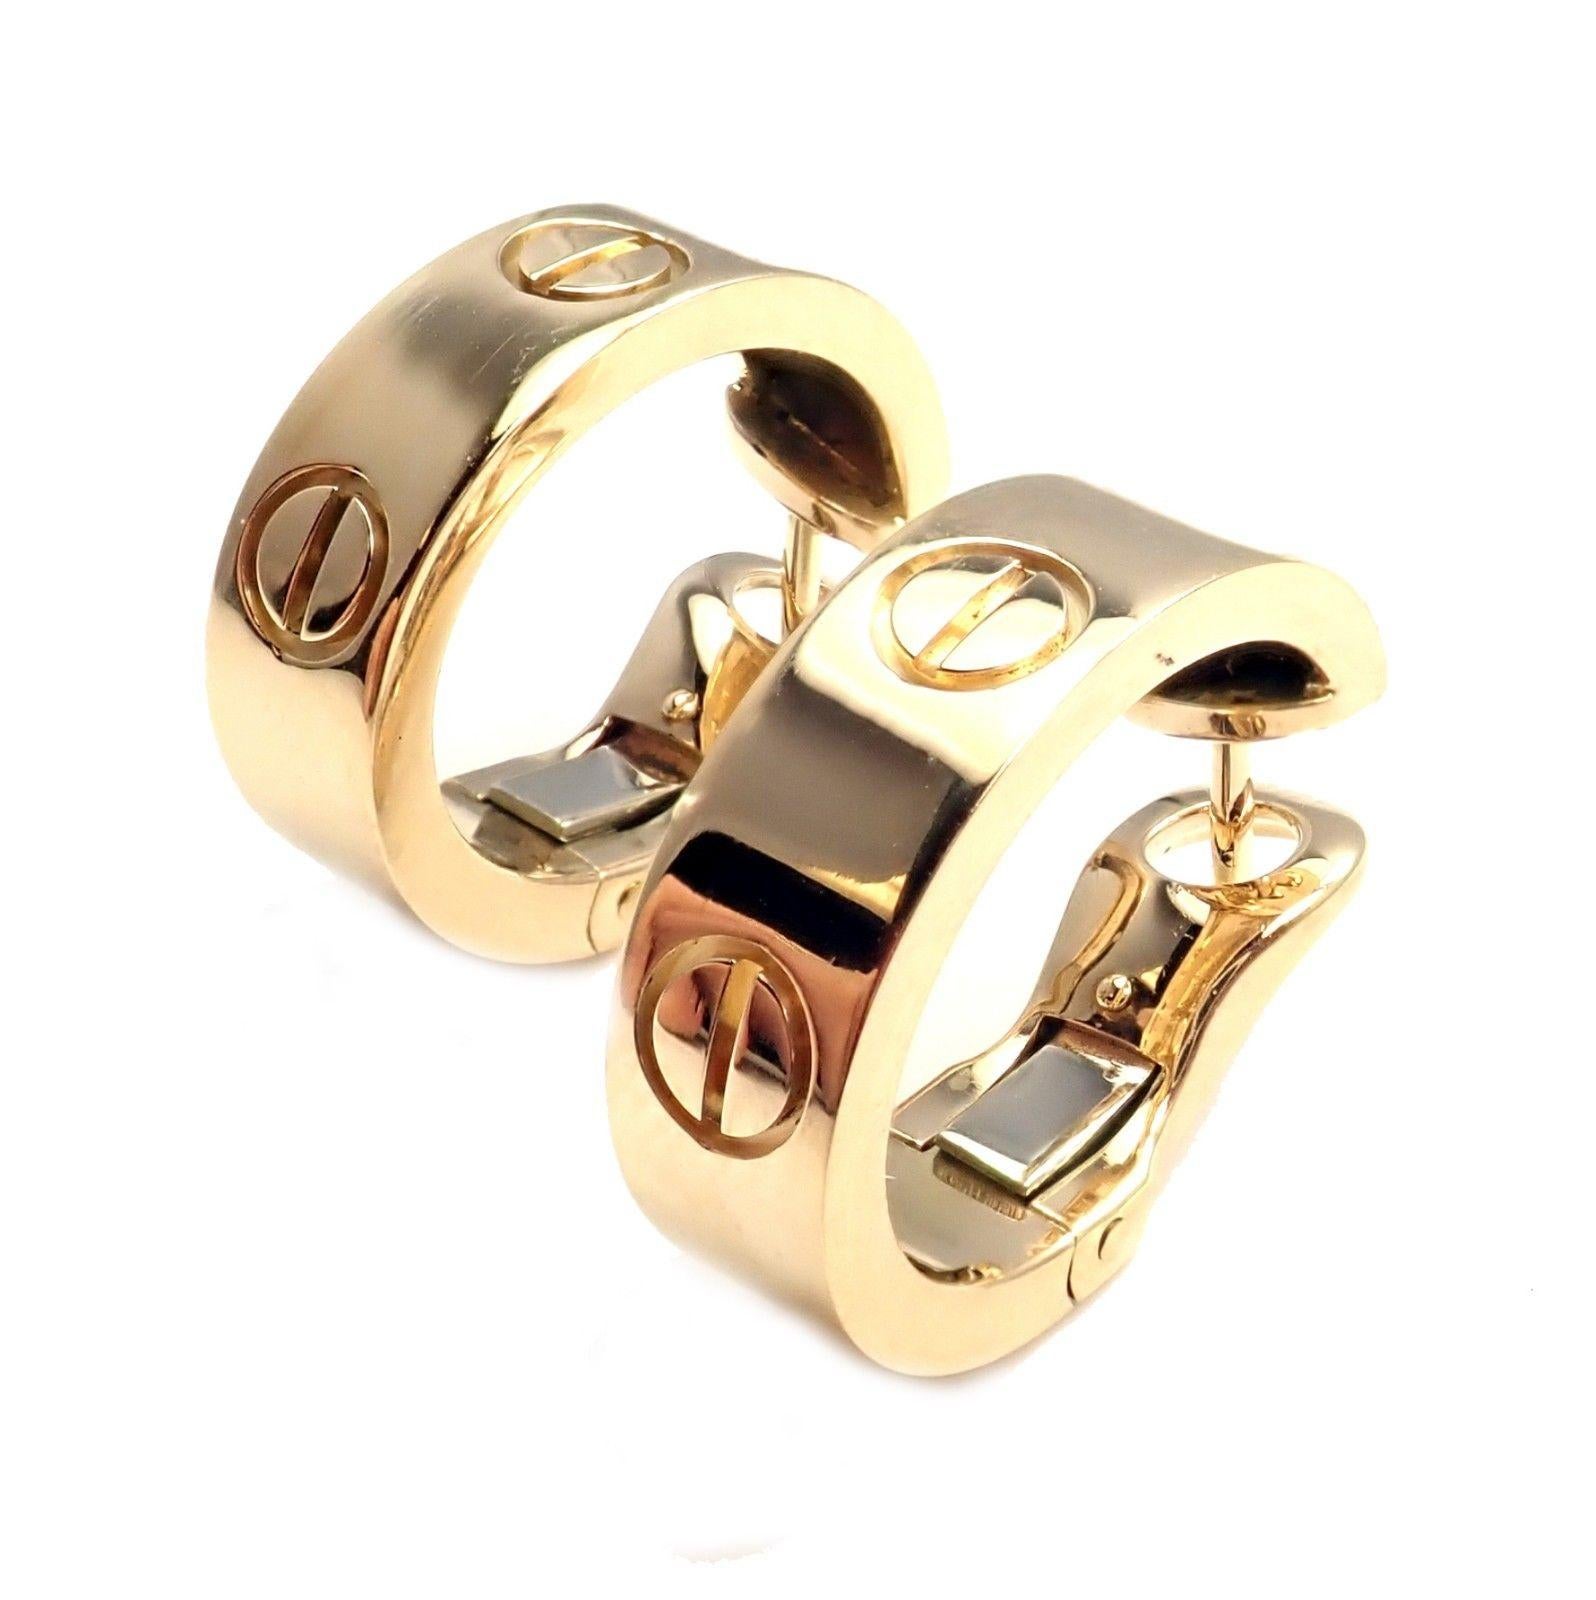 18k Yellow Gold Love Hoop Earrings by Cartier. 
***These Earrings are made for pierced ears  
Details:
Measurements: 18mm x 6mm
Weight: 12.2 grams
Stamped Hallmarks: Cartier 750 JC5158
*Free Shipping within the United States*  
YOUR PRICE: